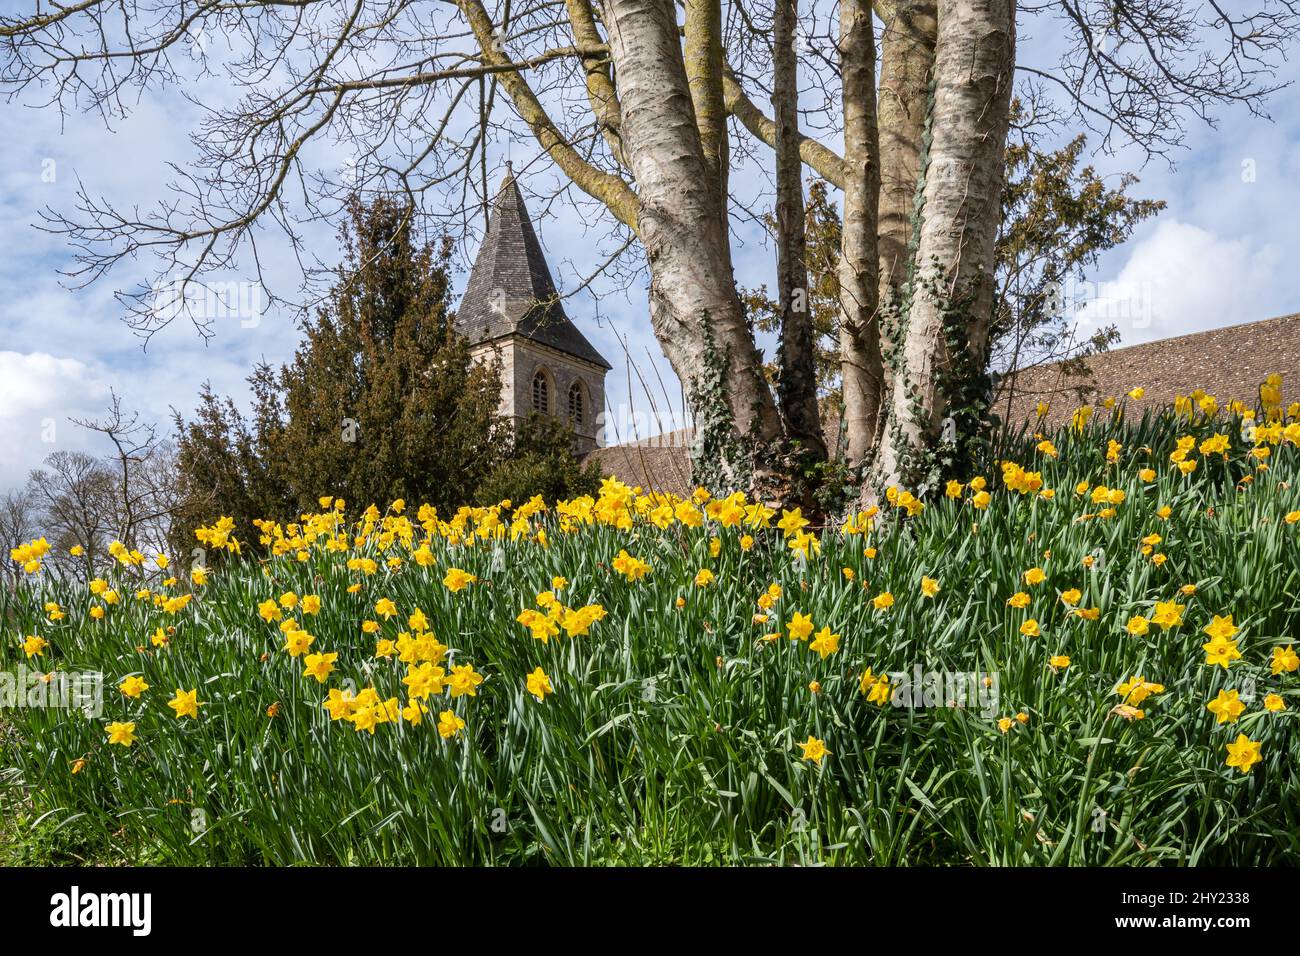 St Mary's Church, a grade II* listed building in Overton village, Hampshire, England, UK, in March with daffodils Stock Photo